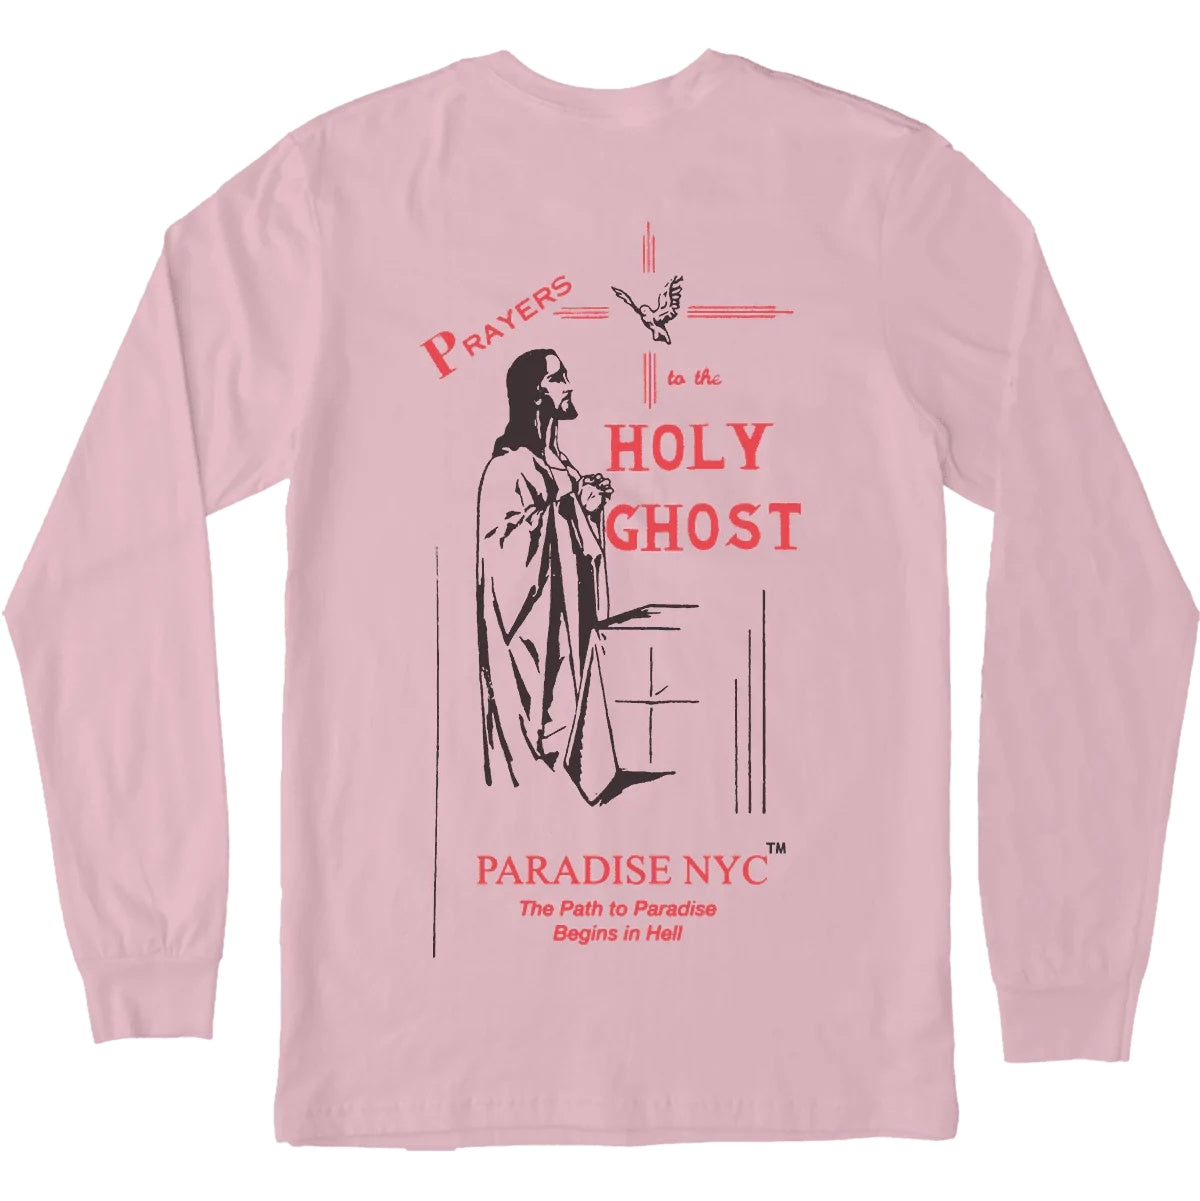 Paradise NYC Prayers To The Holy Ghost Longsleeve Lys Rosa - [modostore.no]